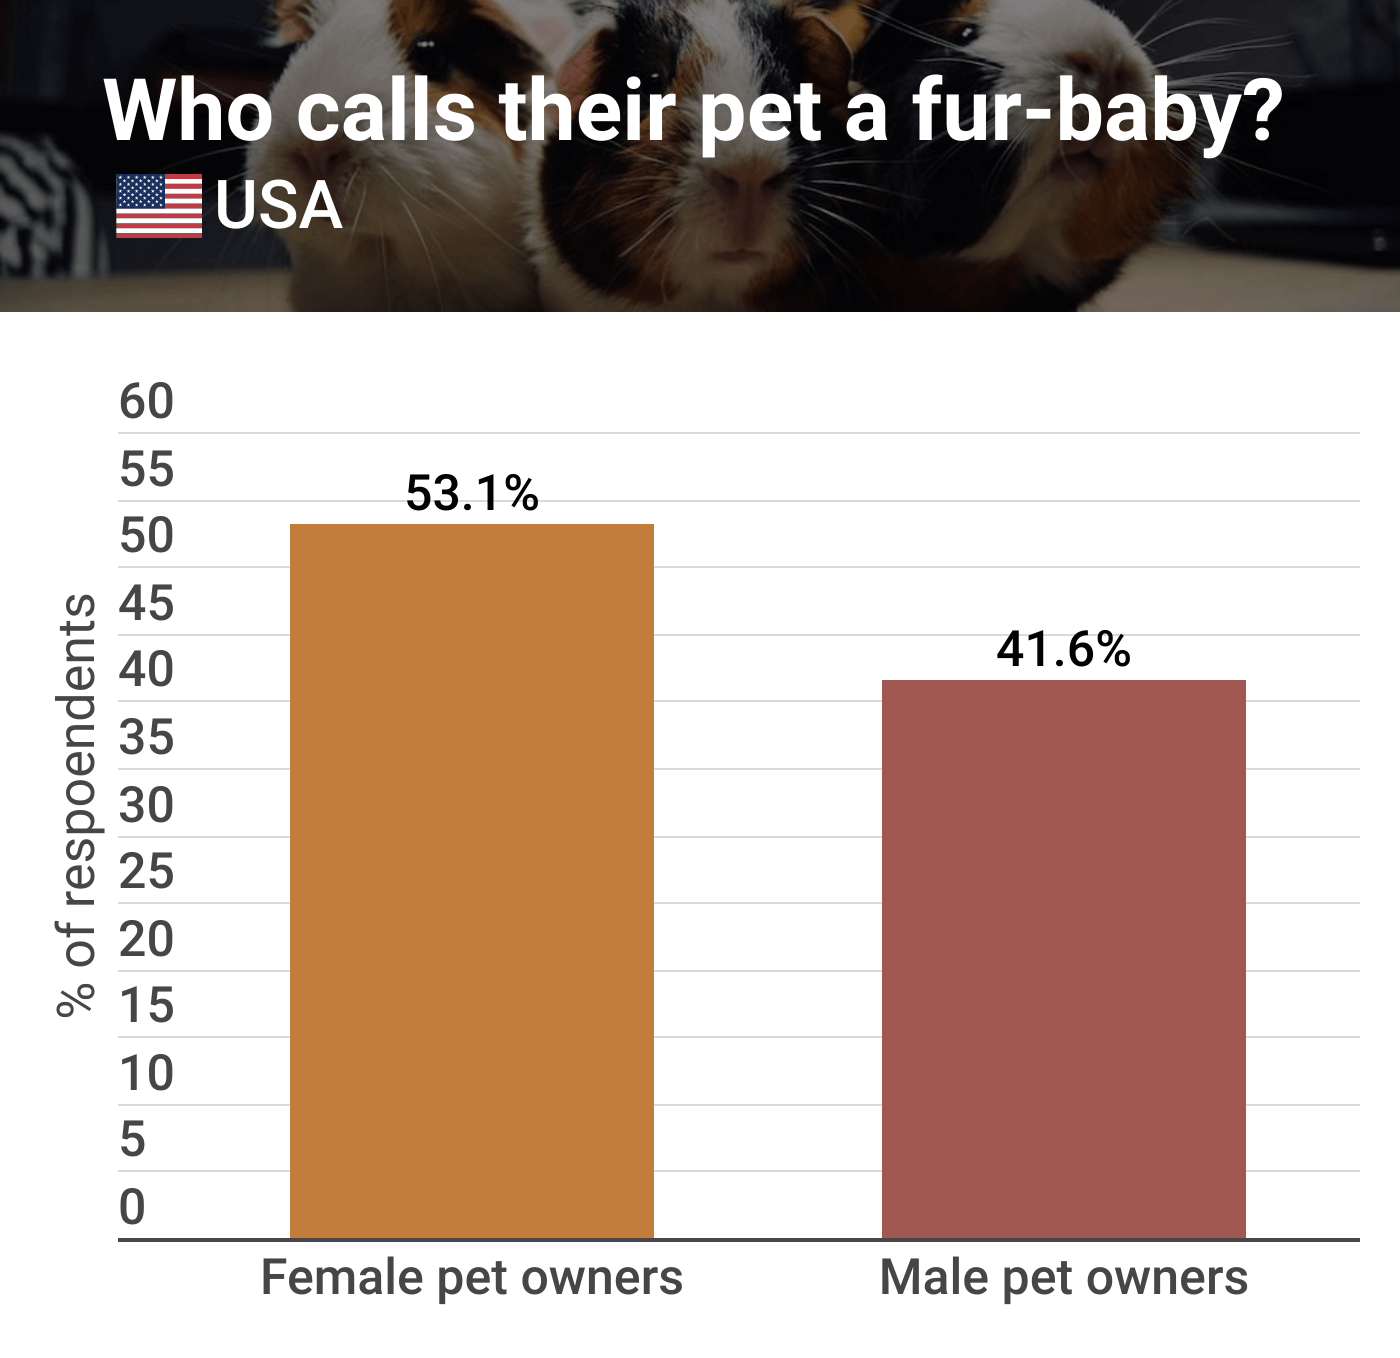 A graph of American pet owners who call their pets fur-babies, broken down by gender